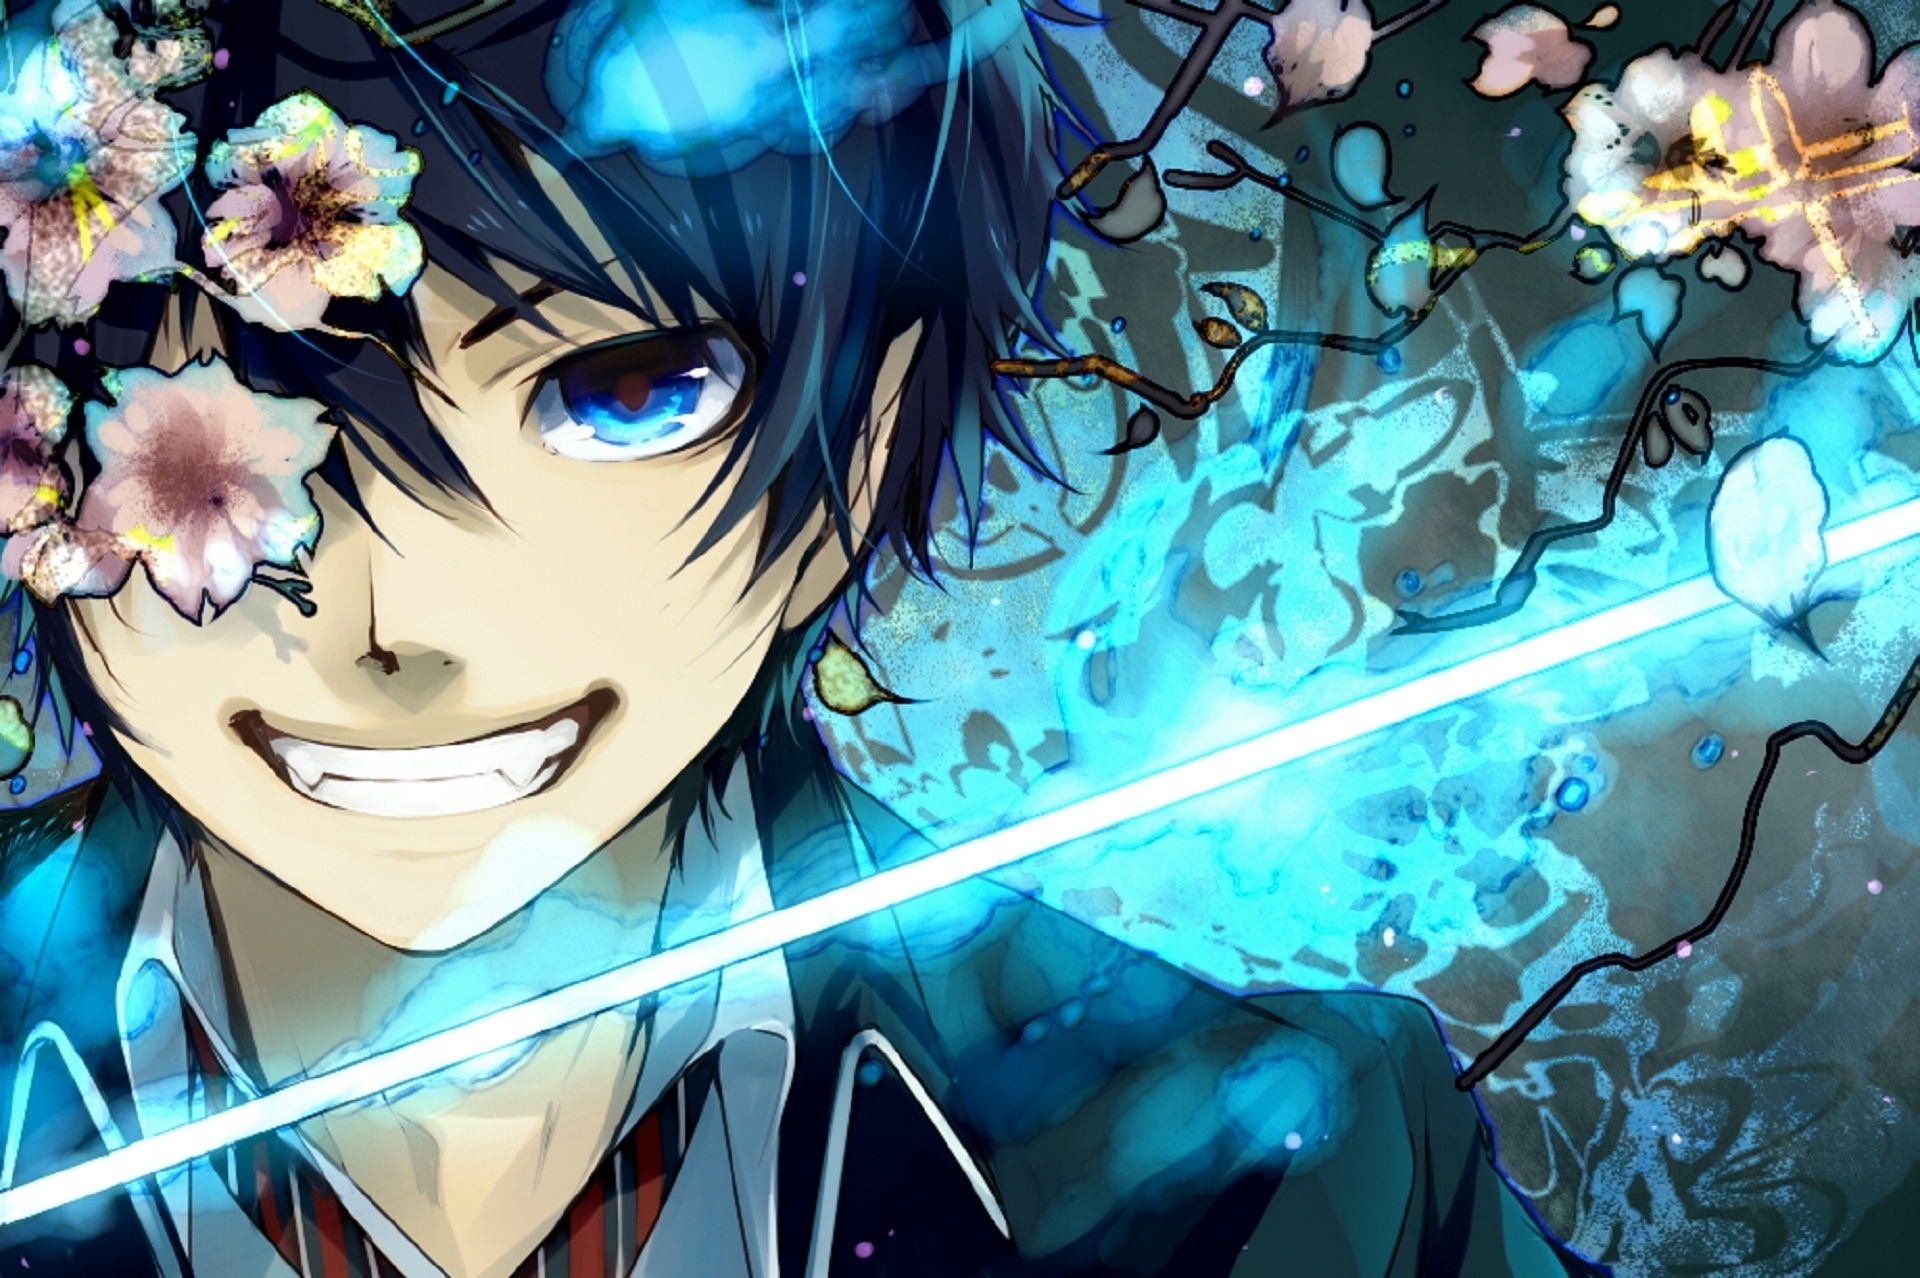 4. "Blue Exorcist" - wide 6